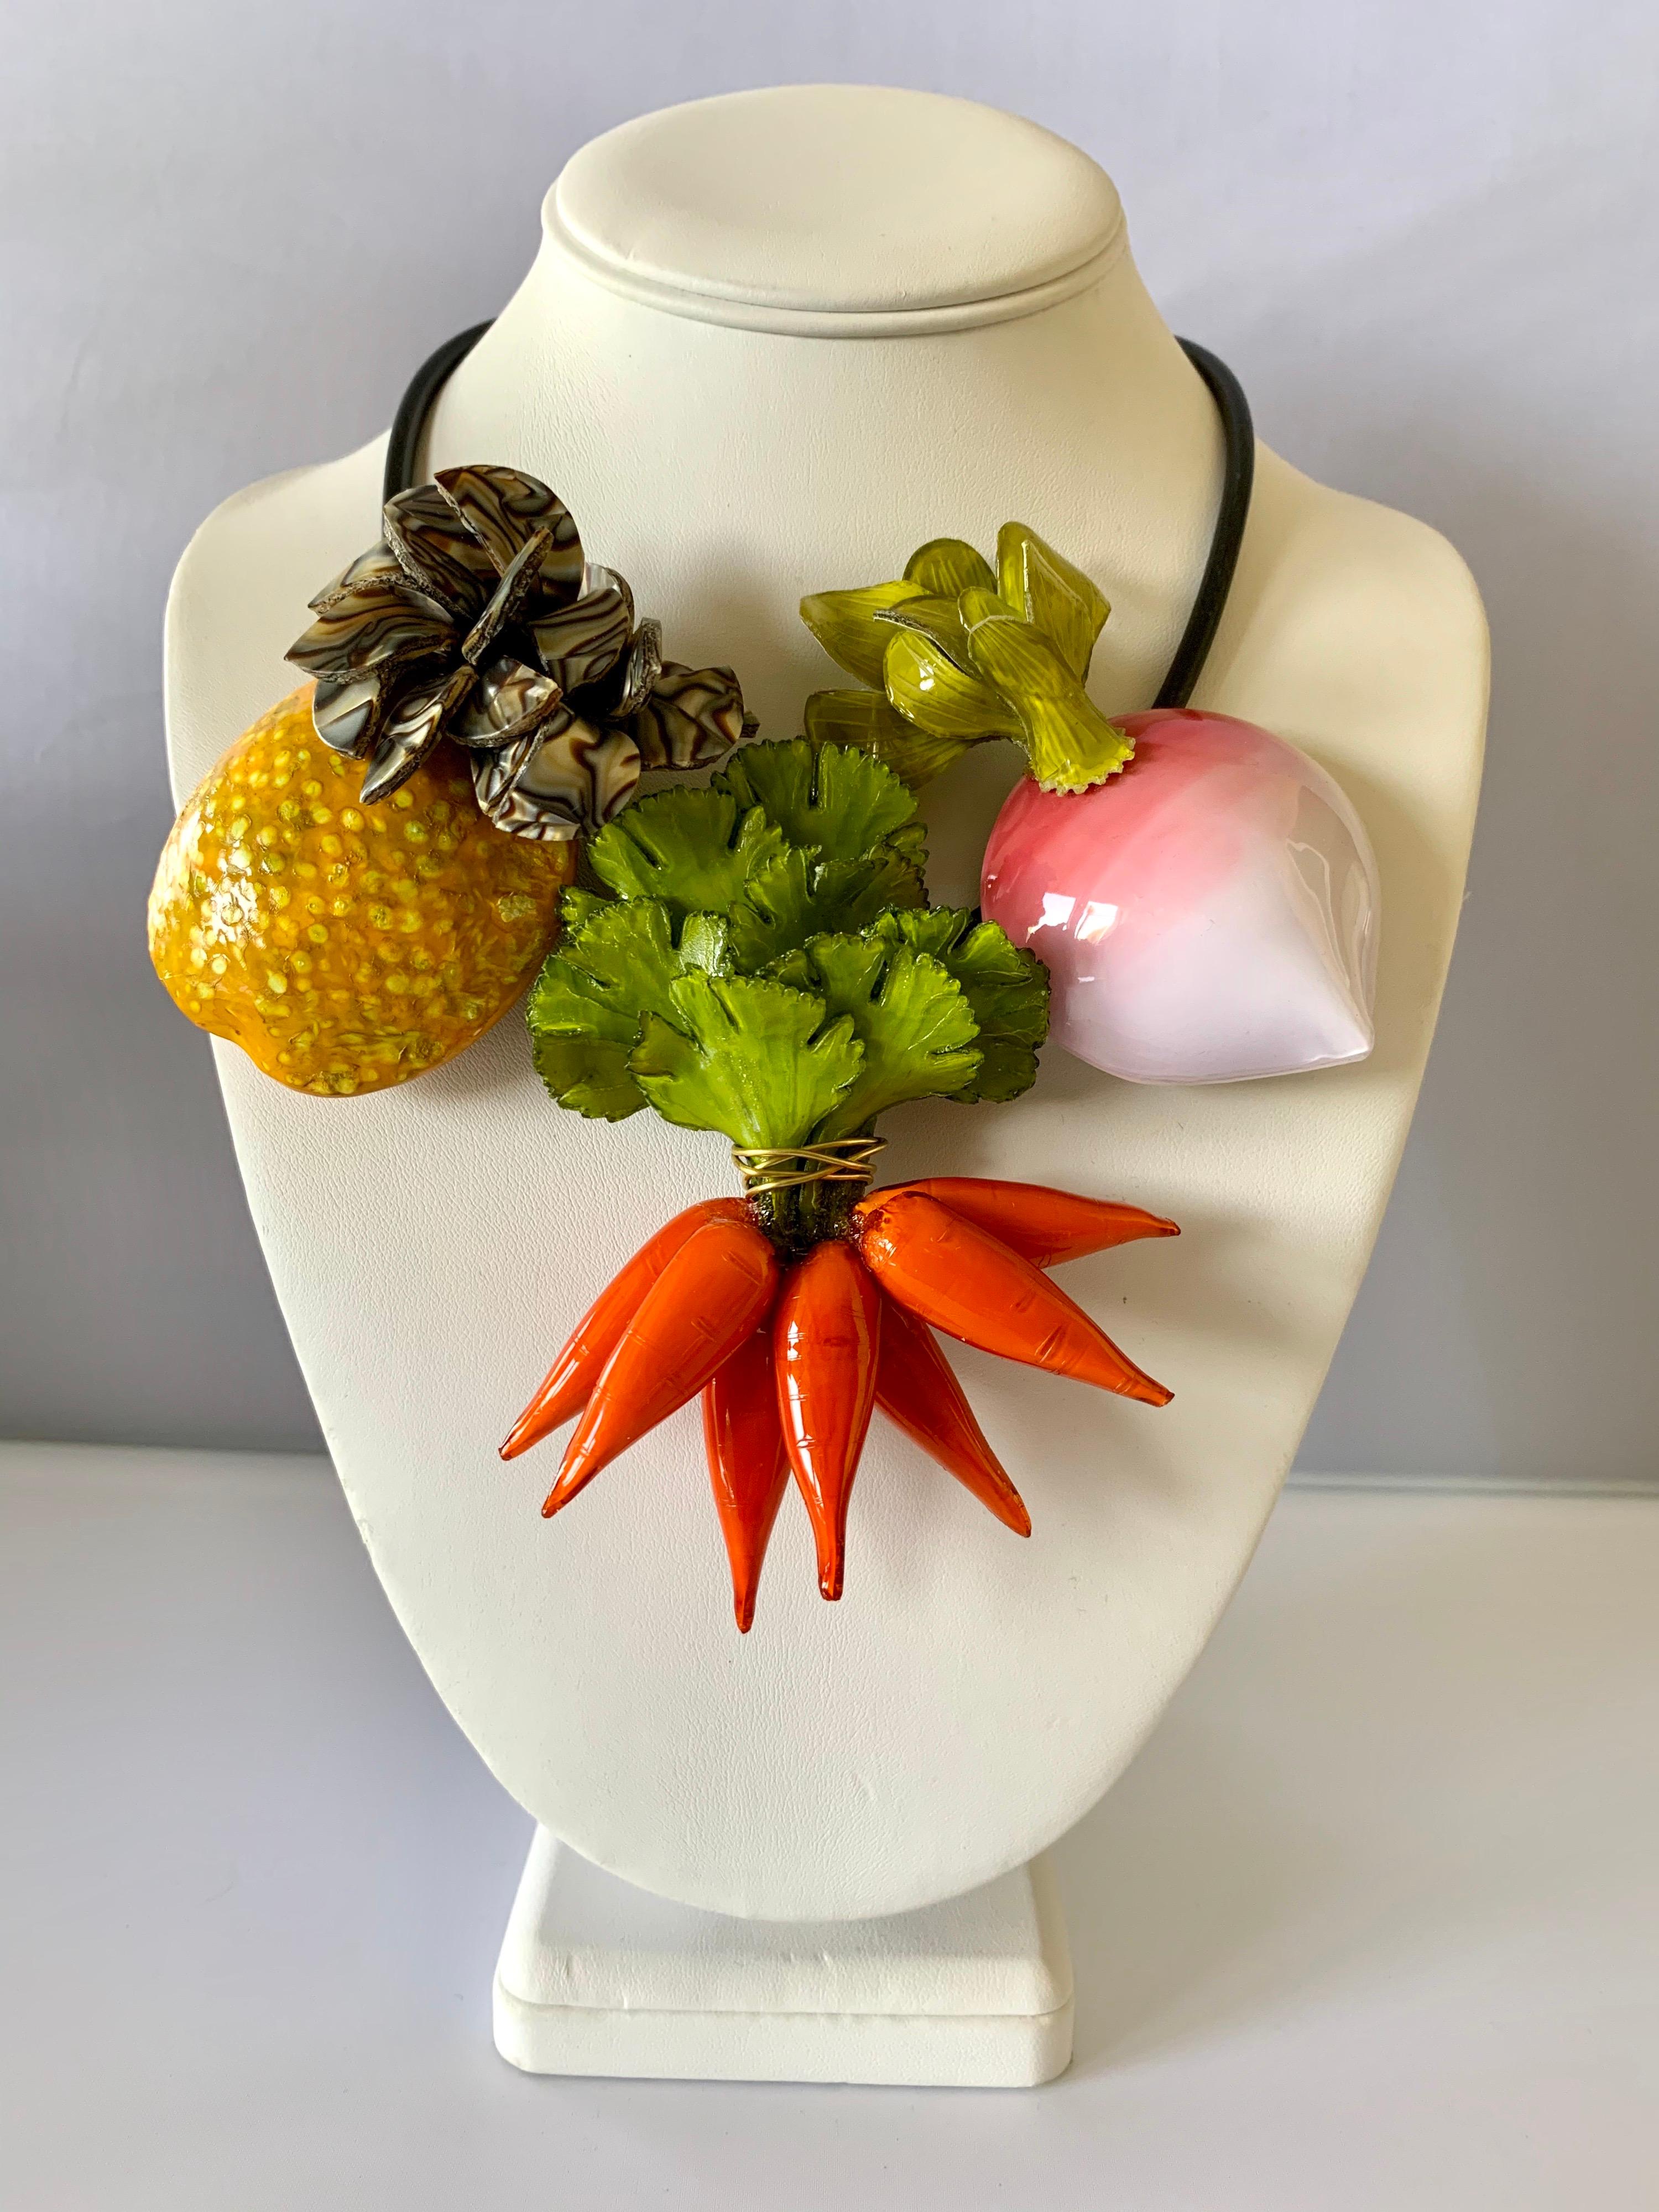 Contemporary French designer fruit and vegetable statement necklace - the statement necklace is comprised out of a black rubber cord that is embellished by a pineapple, carrot, and radish pins. The piece can be worn as a necklace or the items